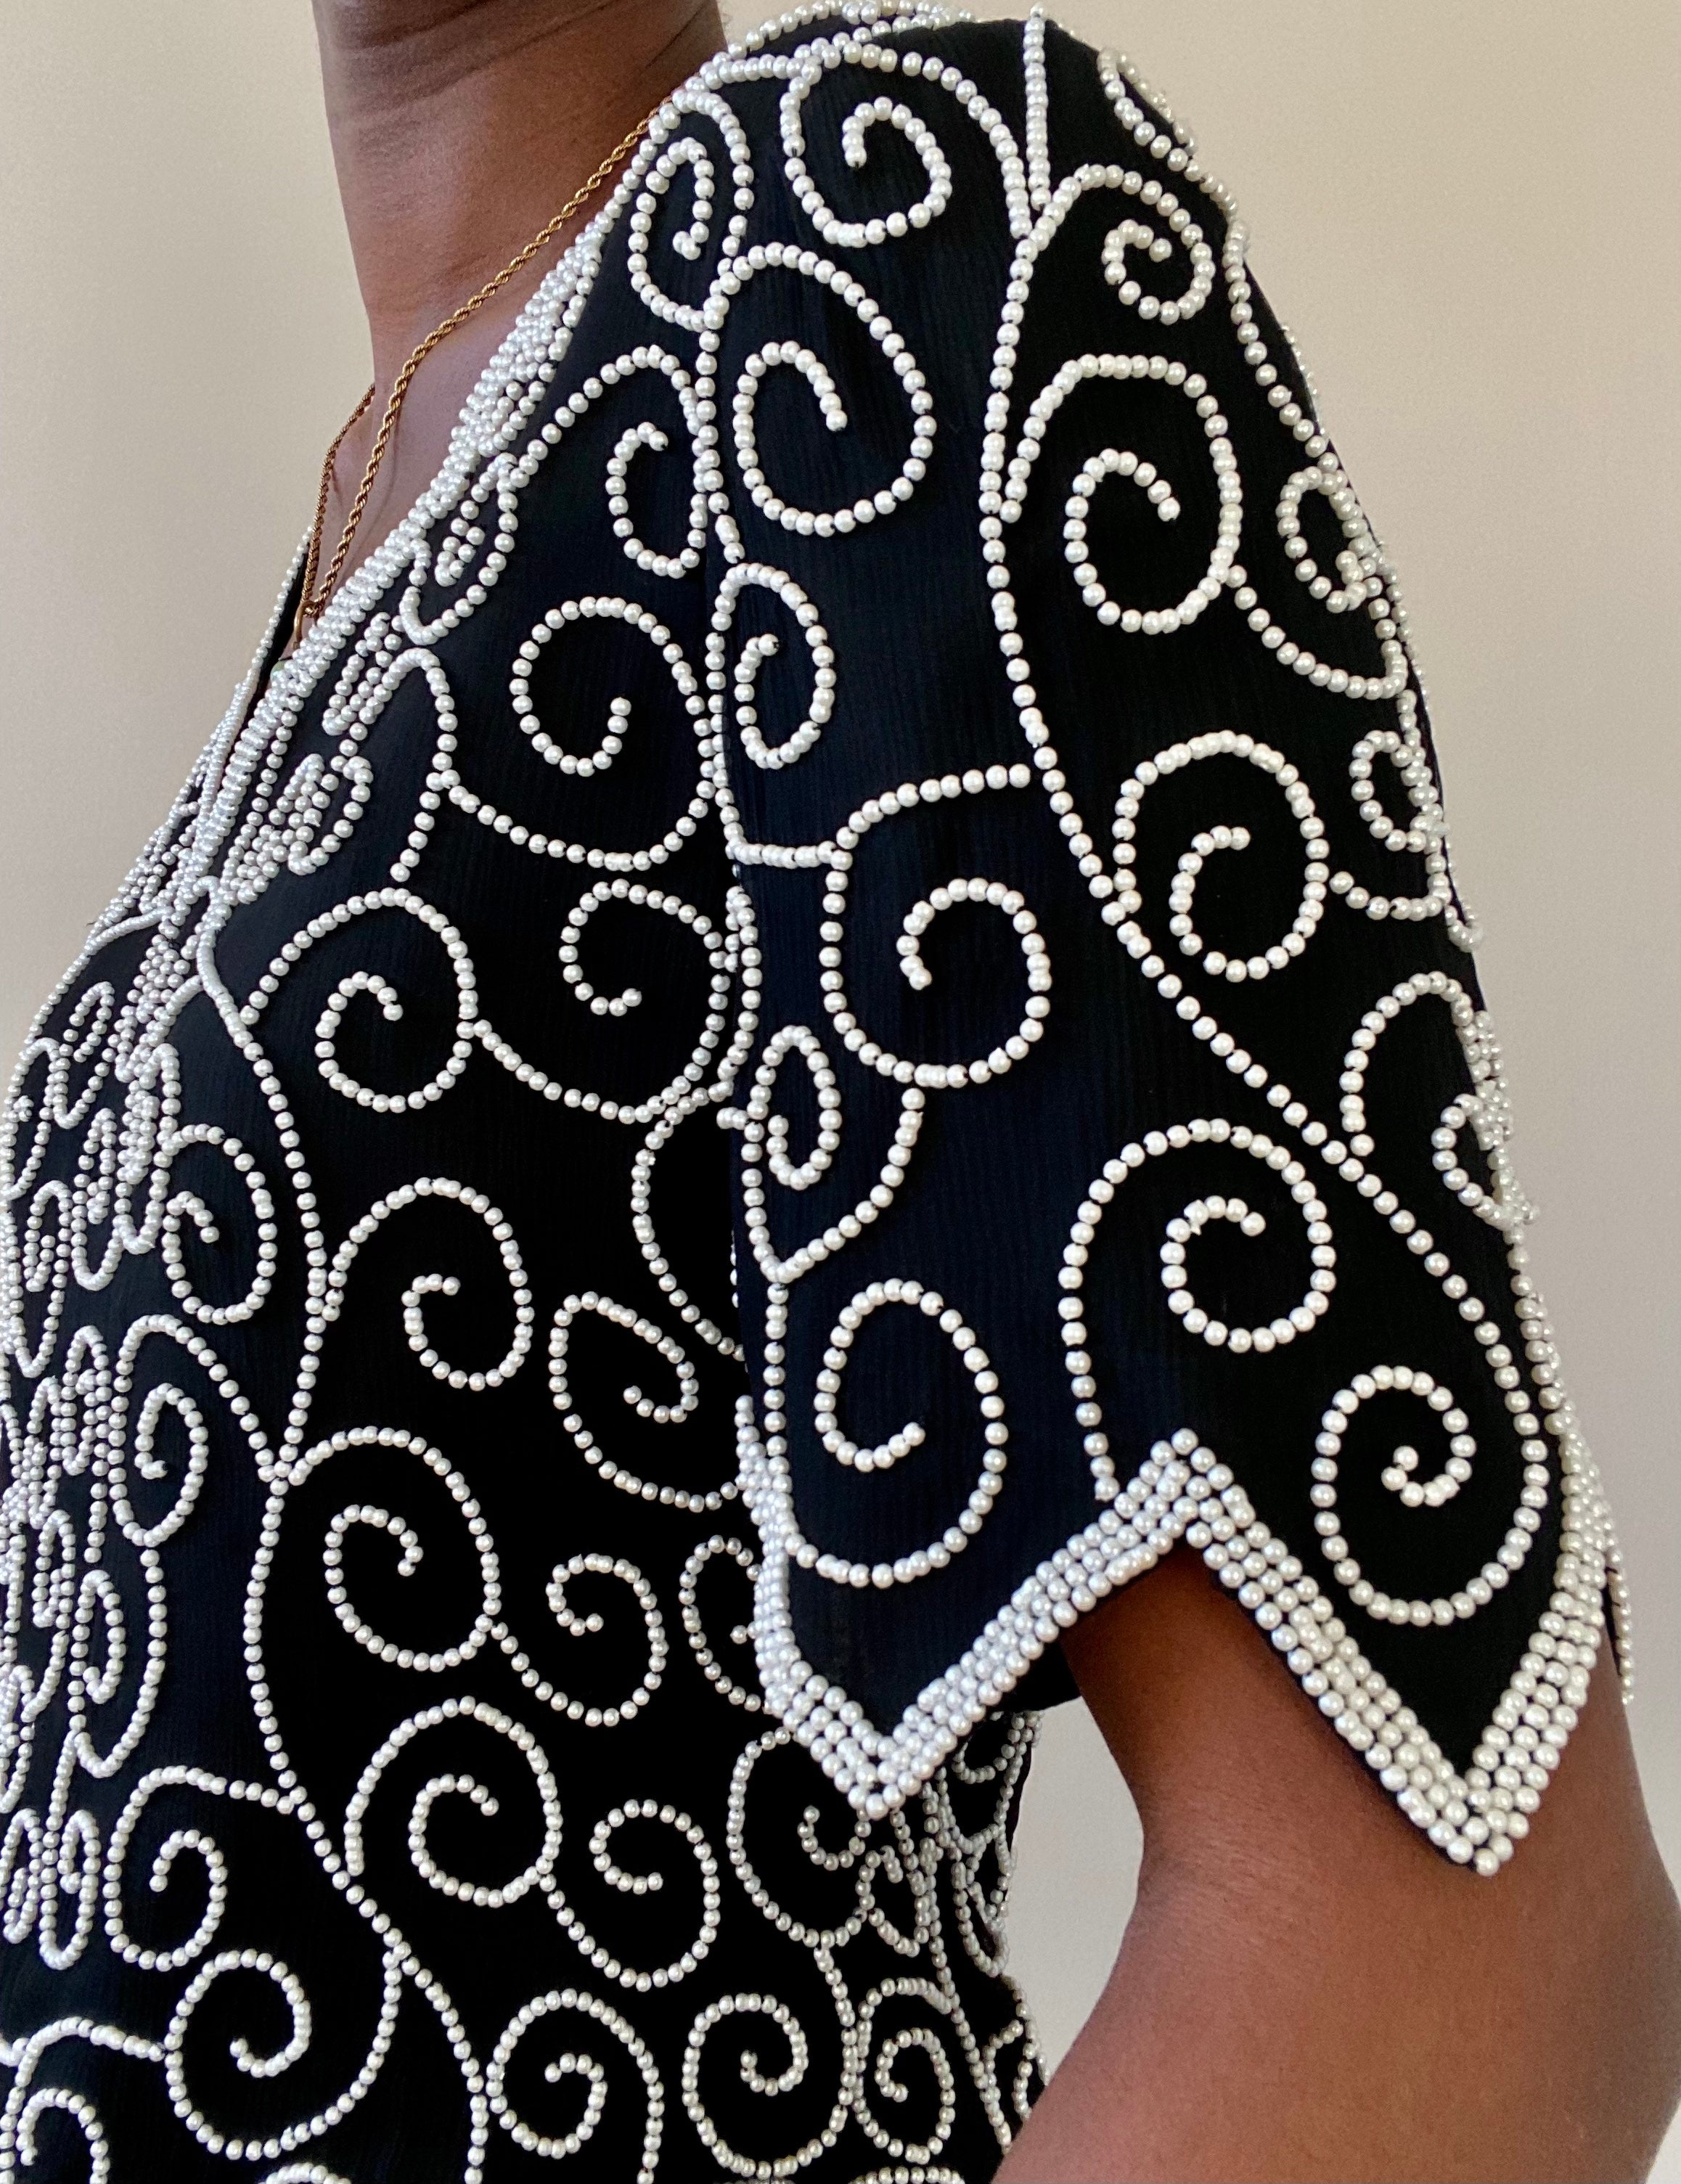 Silk Black Beaded Abstract Blouse